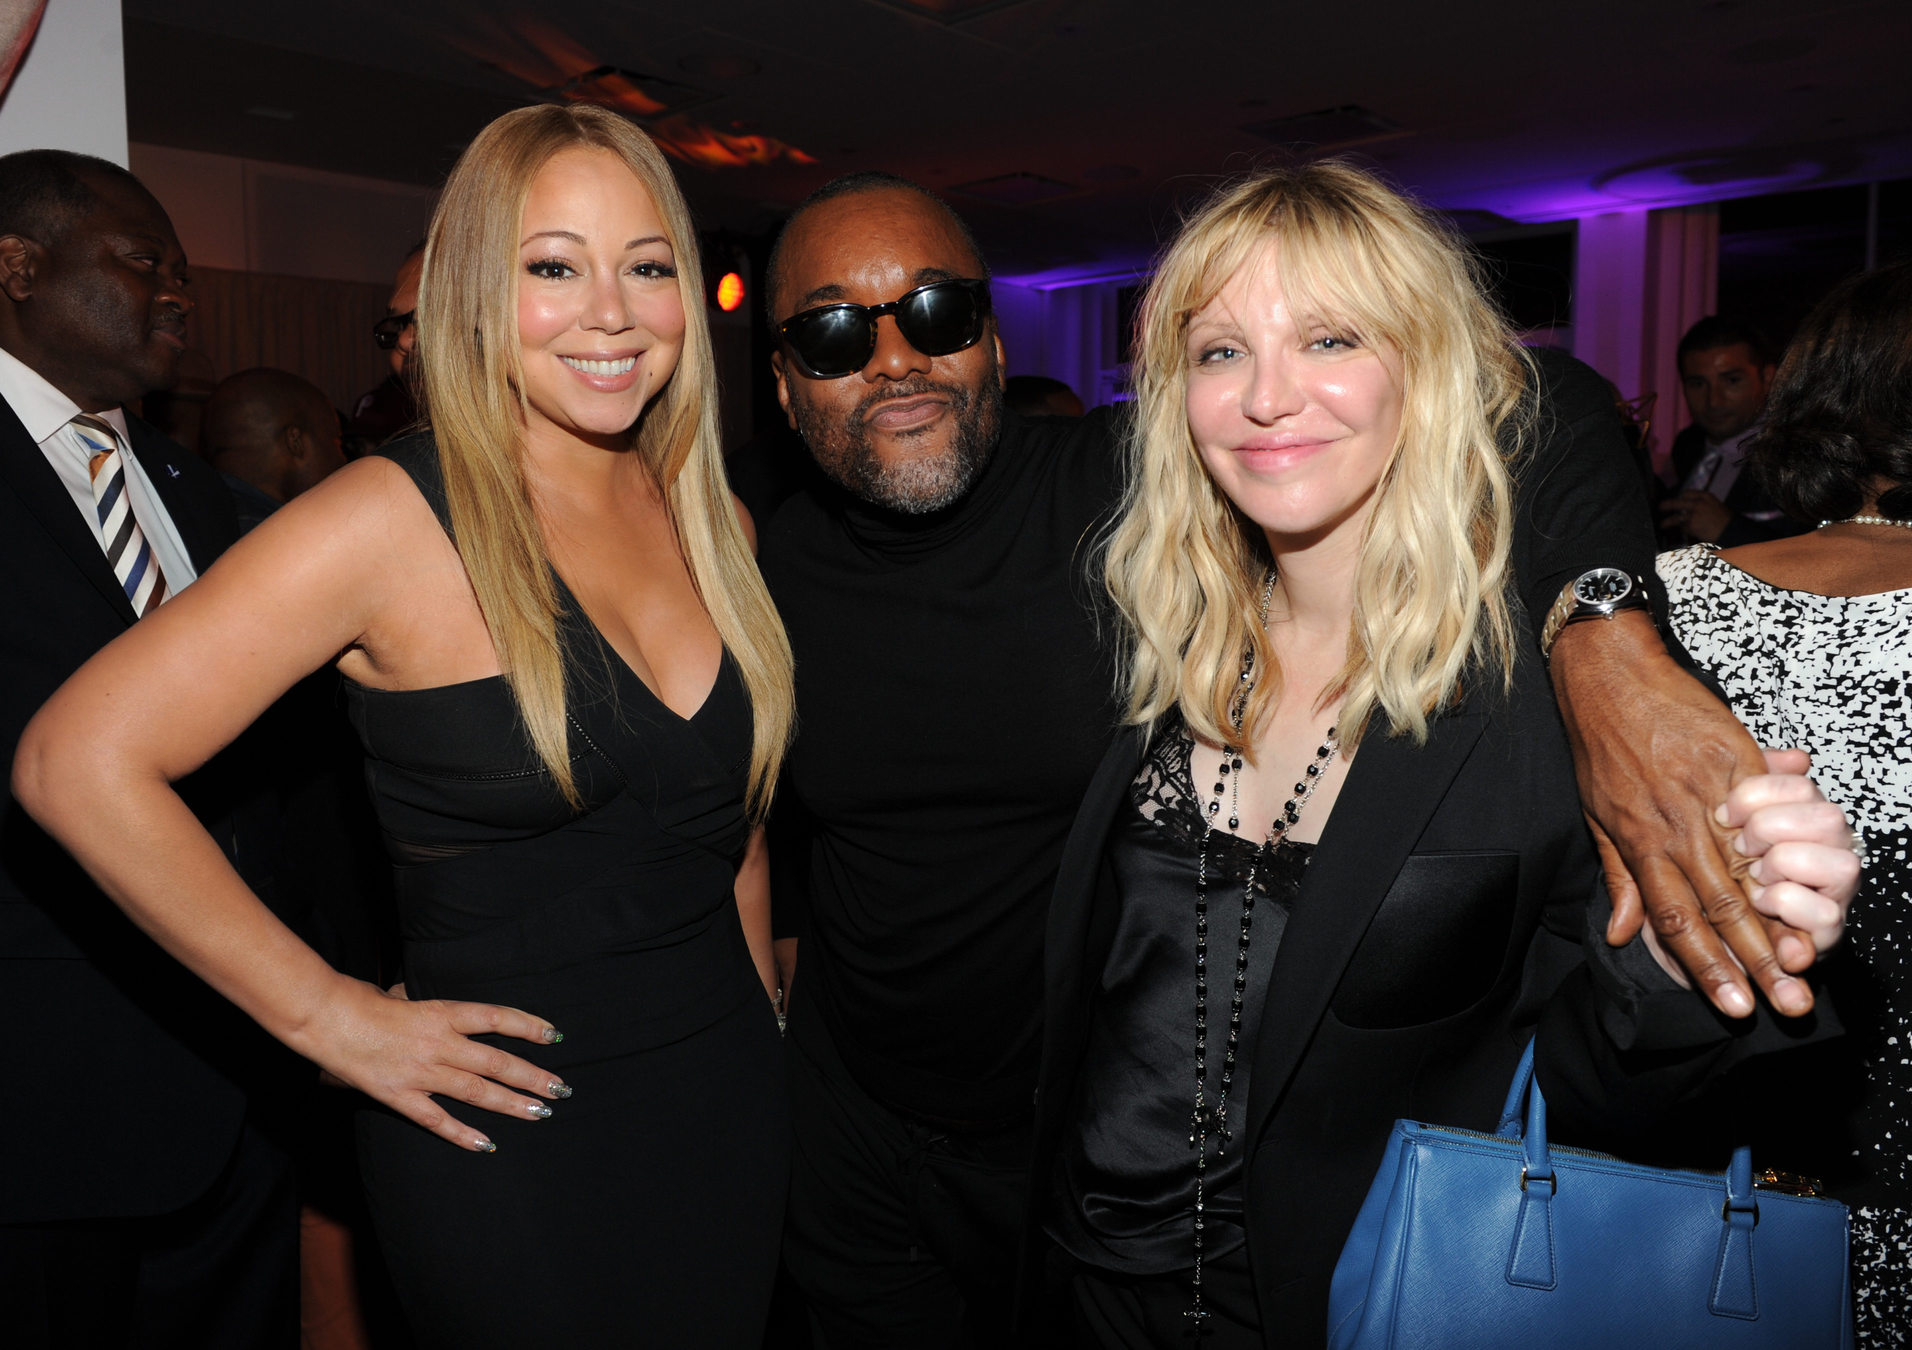 EMPIRE: EMPIRE Special Guests Mariah Carey and Courtney Love celebrate with EMPIRE Creator/Executive Producer at the EMPIRE Season Two season premiere event at Carnegie Hall on Saturday, Sept. 12 in New York, NY. Season Two premieres Wednesday, Sept. 23 (9:00-10:00 PM ET/PT) on FOX. © 2015 FOX BROADCASTING CR: Frank Micelotta/FOX